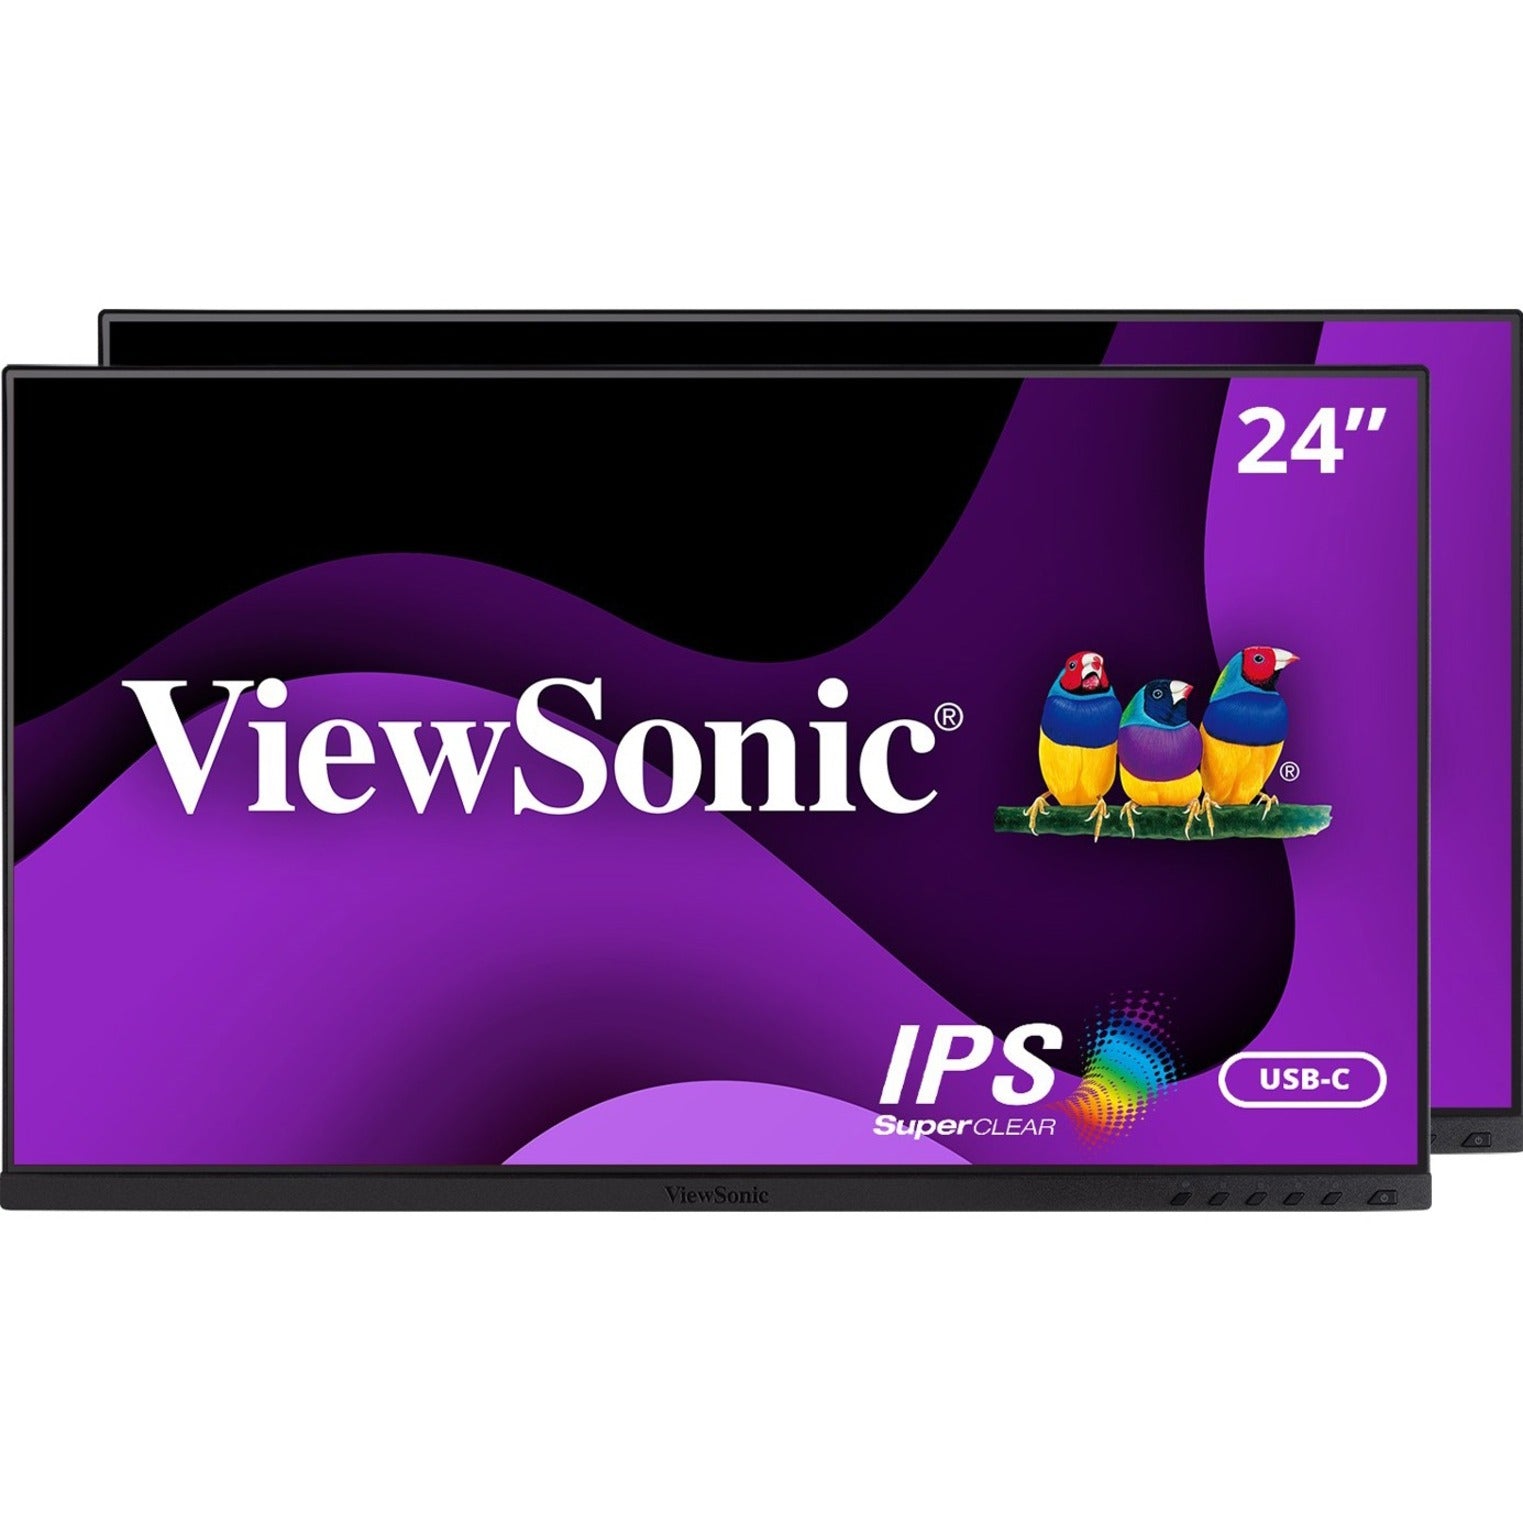 ViewSonic VG2455_56A_H2 24 Dual Pack Head-Only 1080p IPS Monitors, USB C 3.2, 90W Power Delivery, Docking Built-In, HDMI, VGA